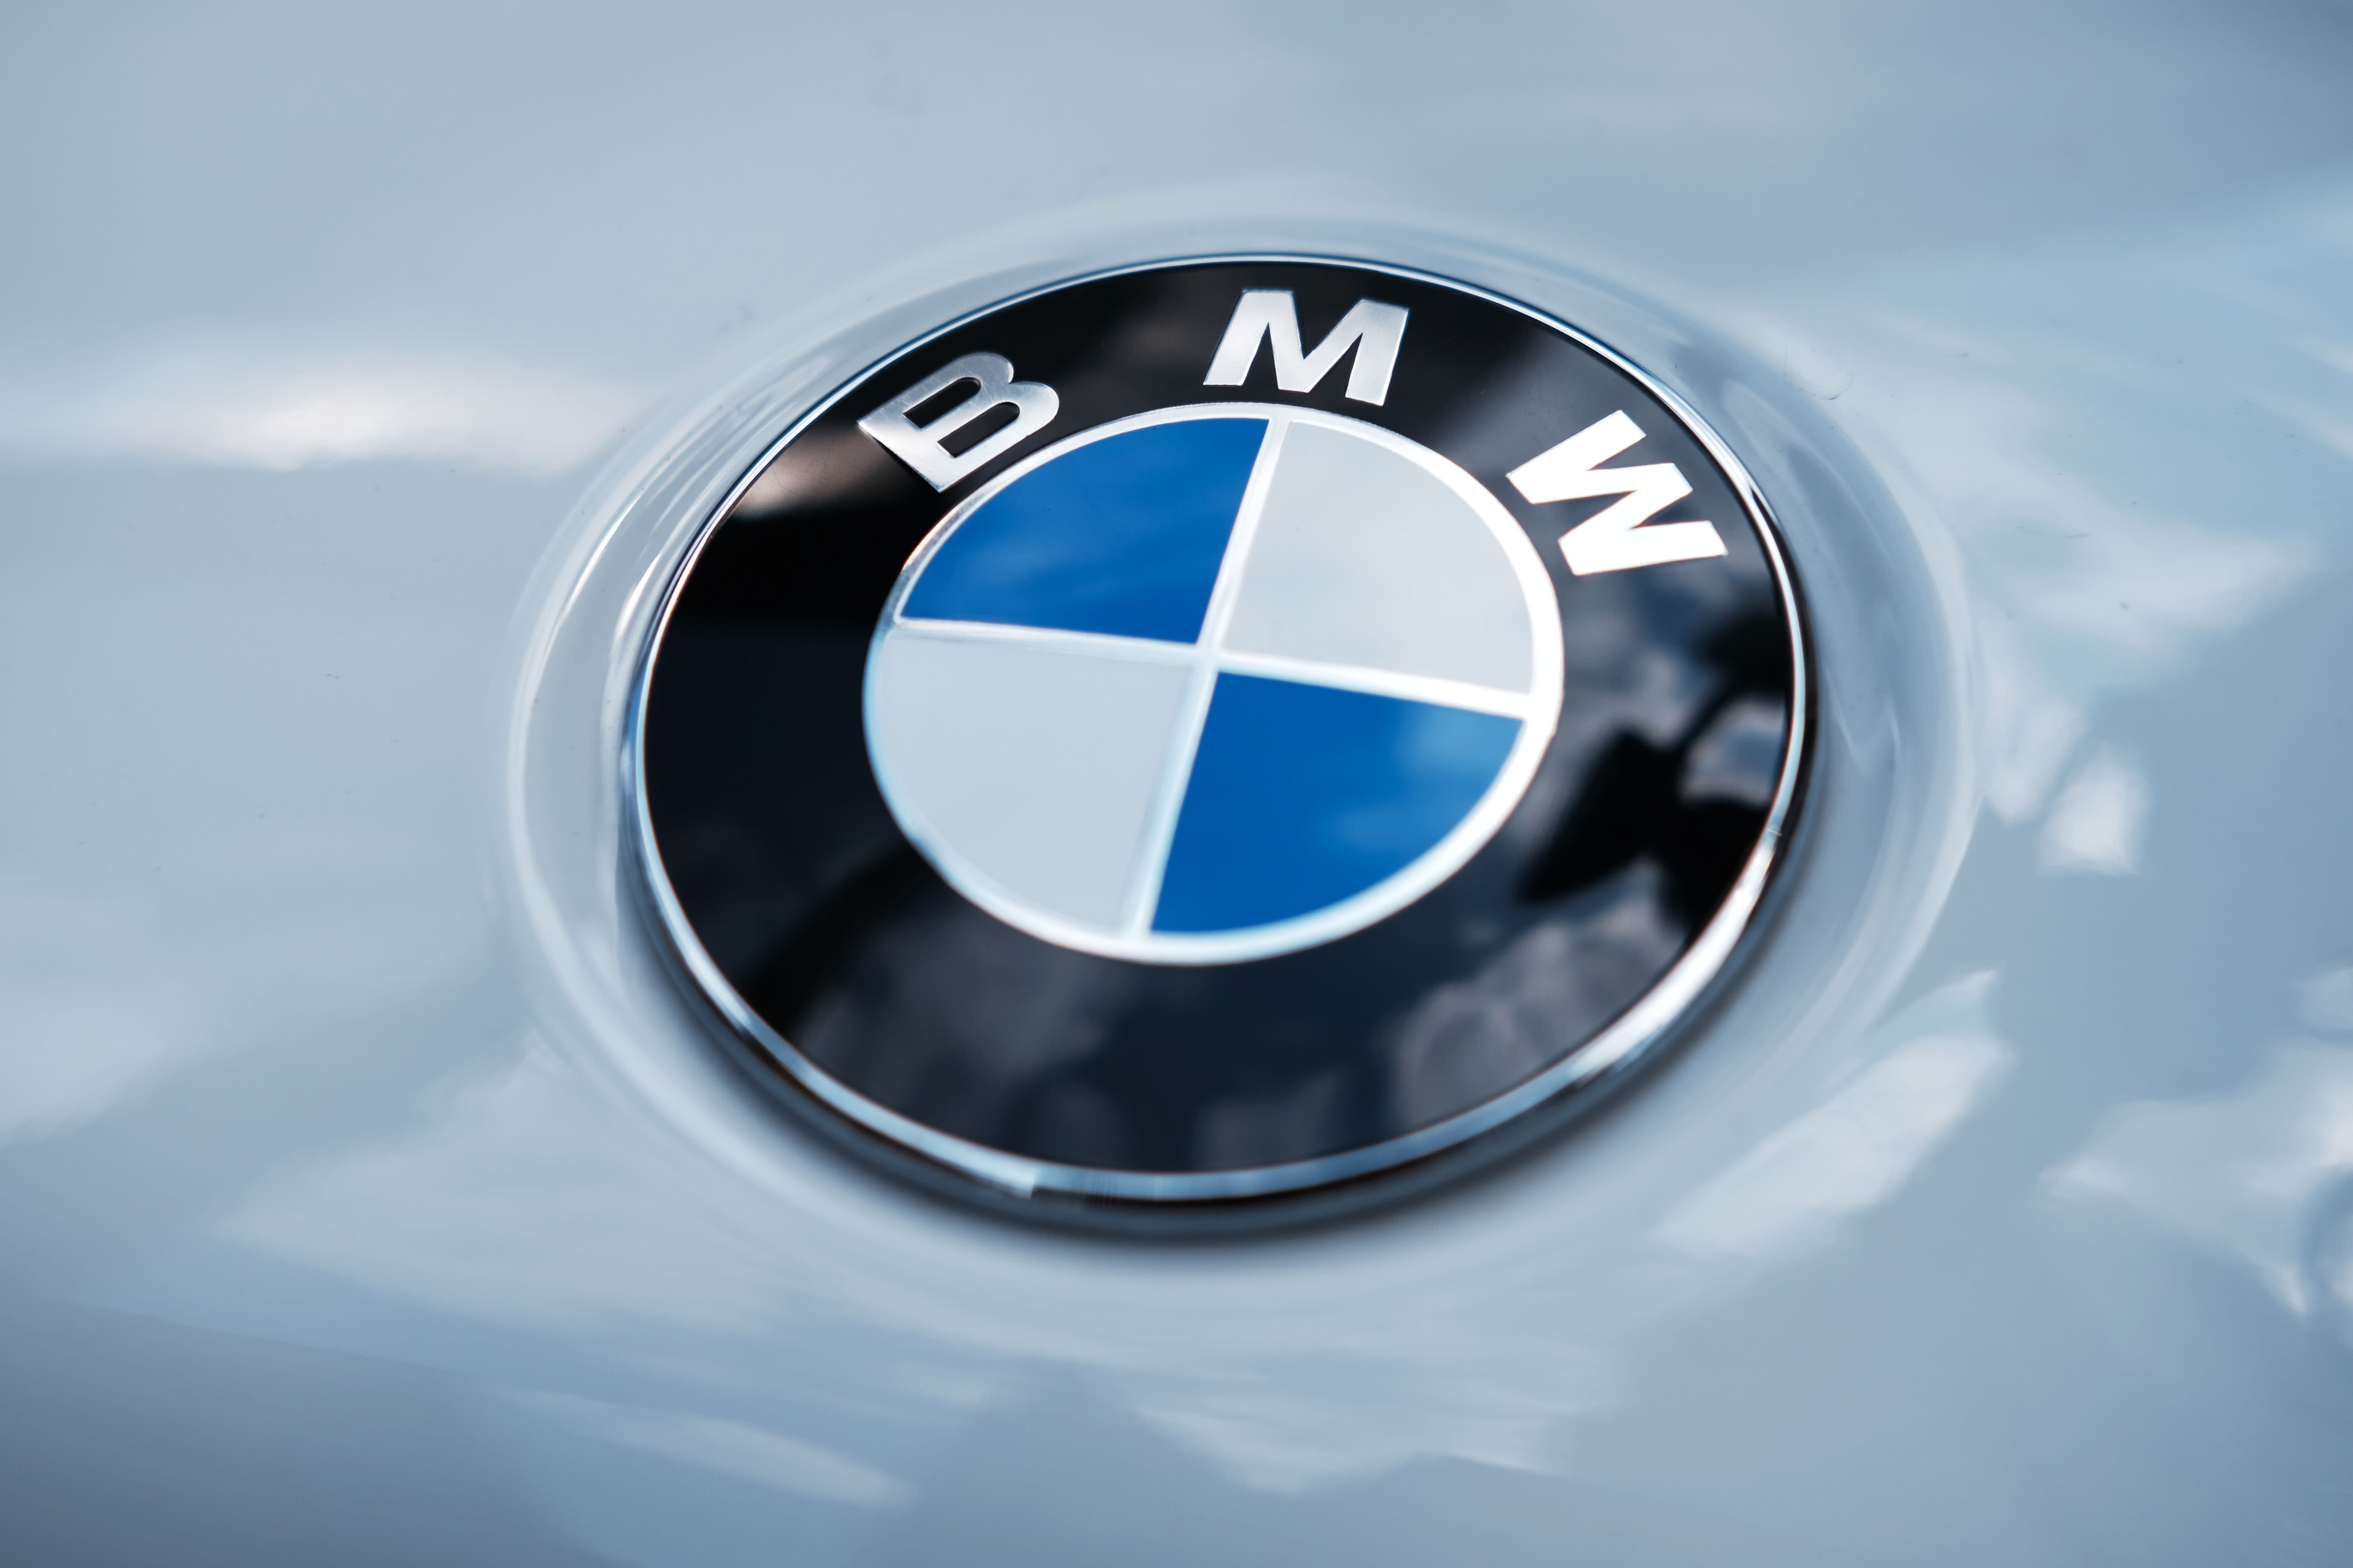 BMW secures funding for EV battery aiming to rival traditional engine